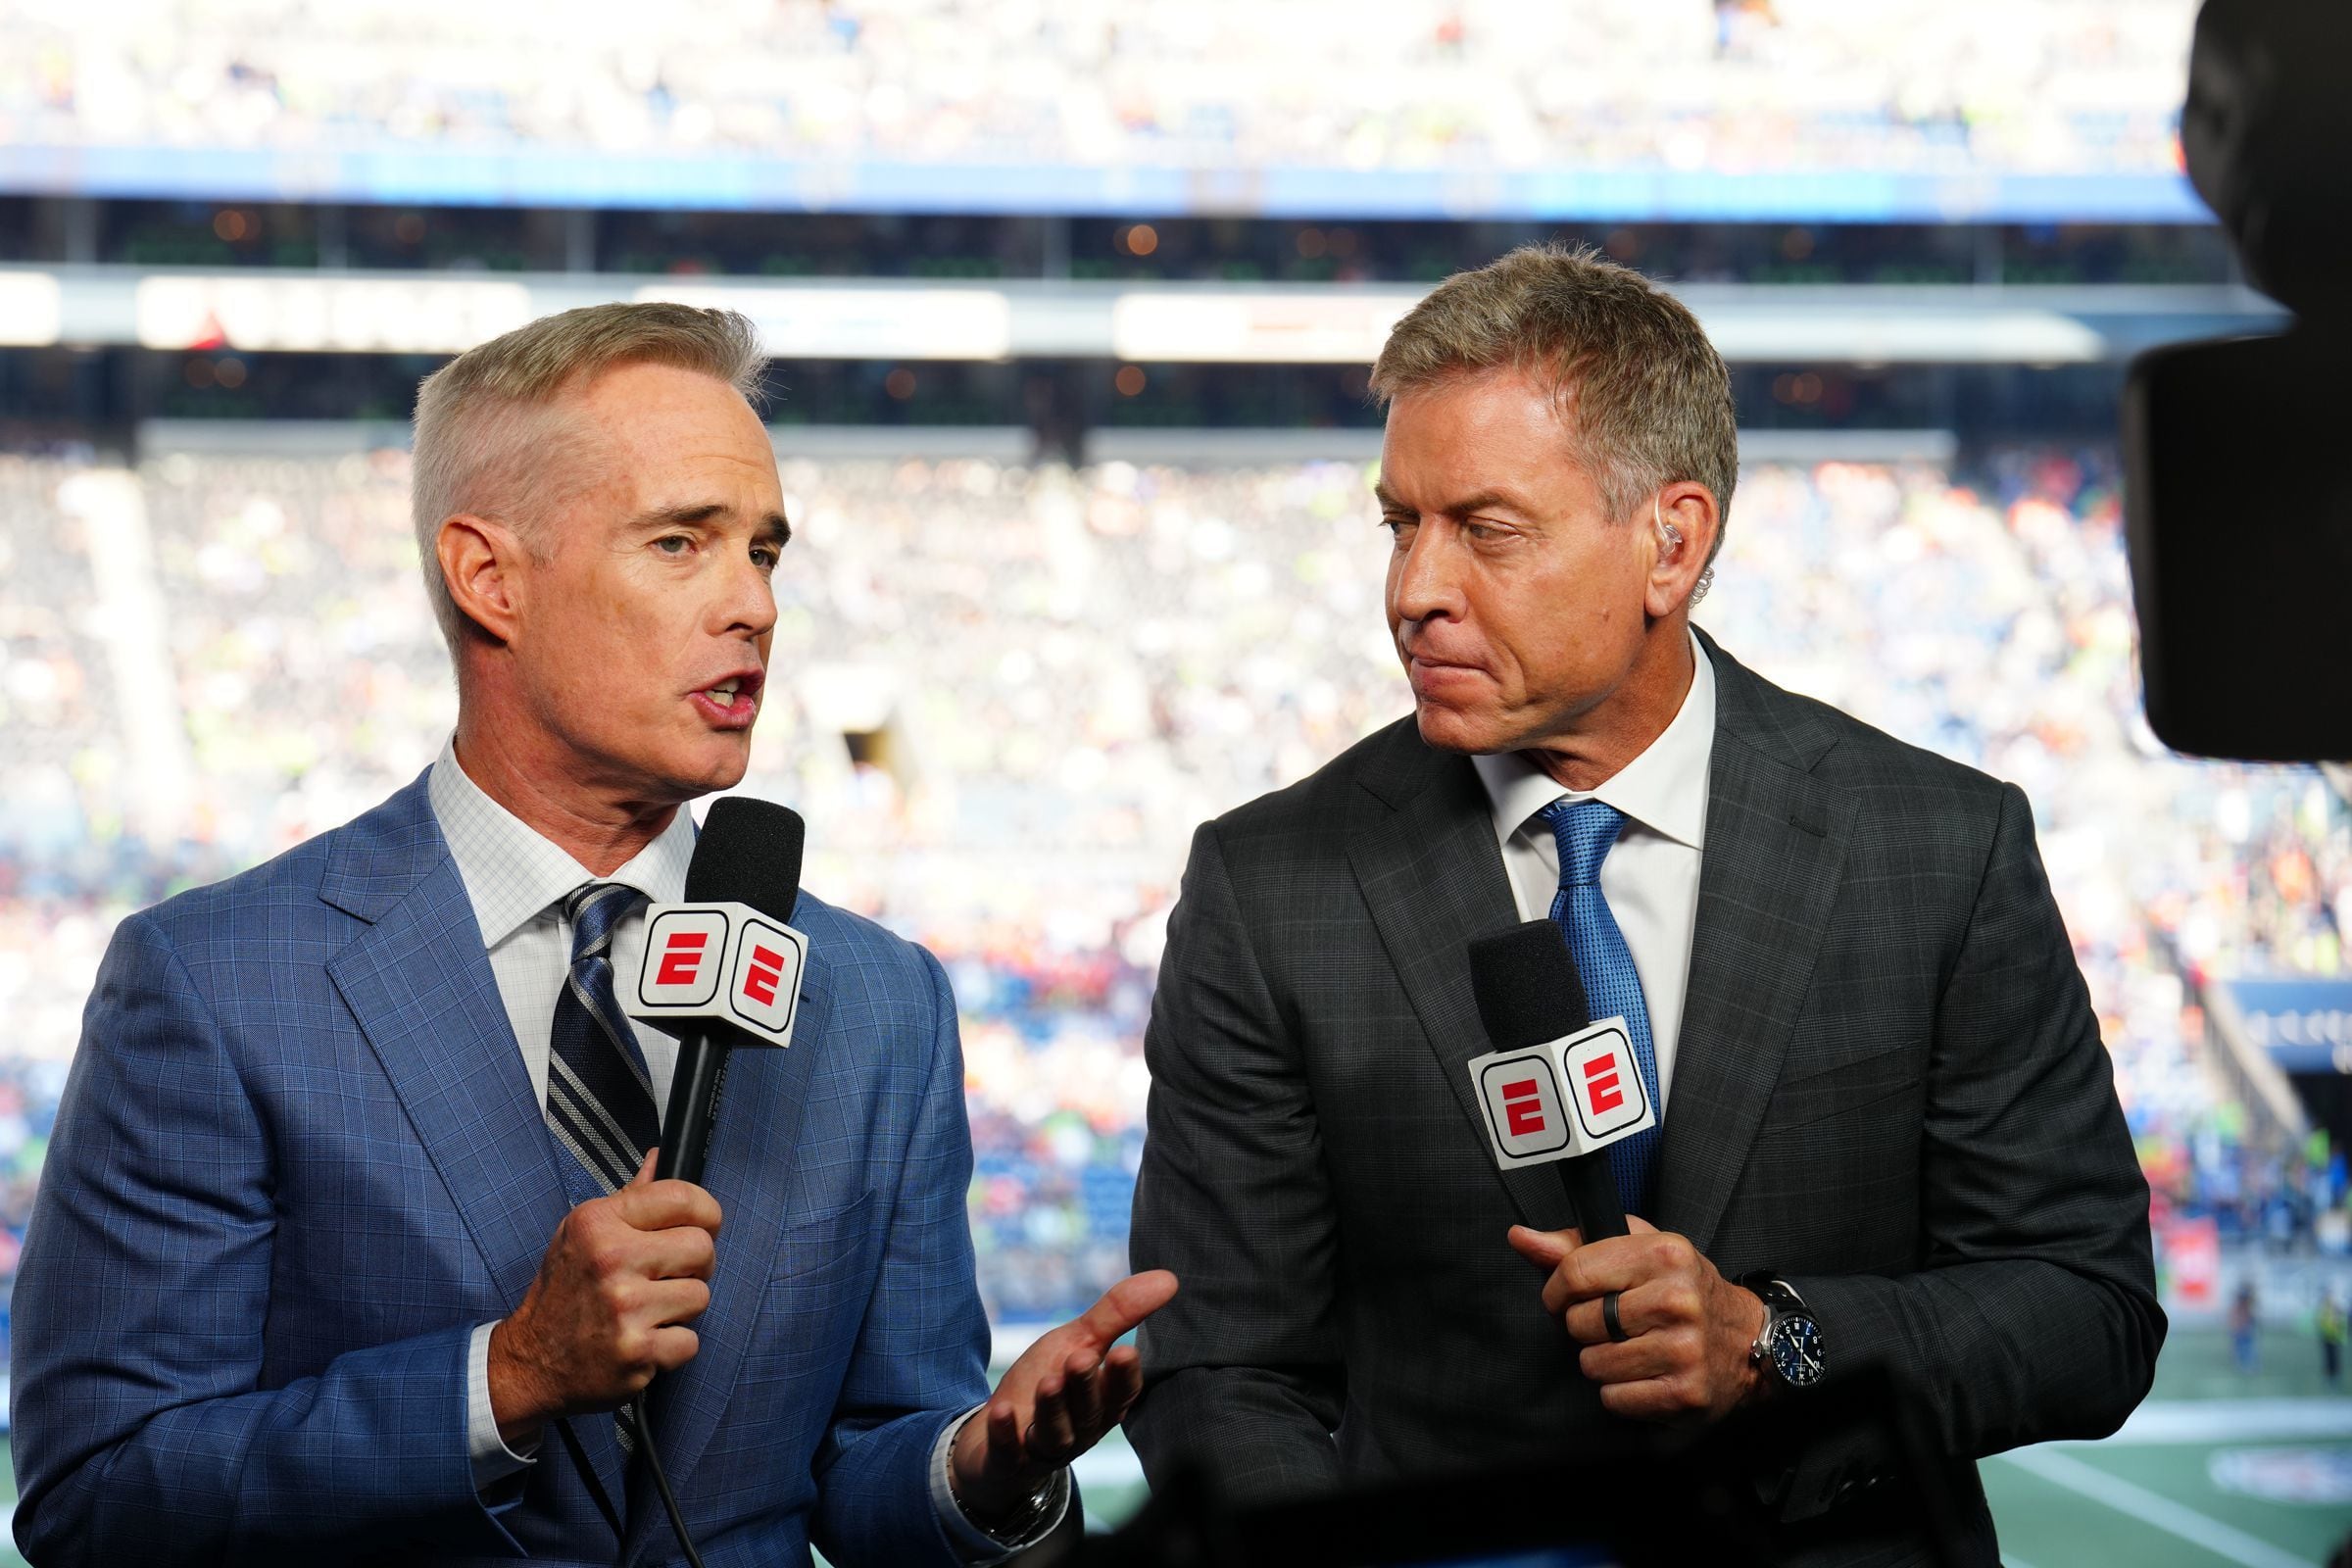 Monday Night Football': ABC Orders More Simulcasts For Strike-Hit